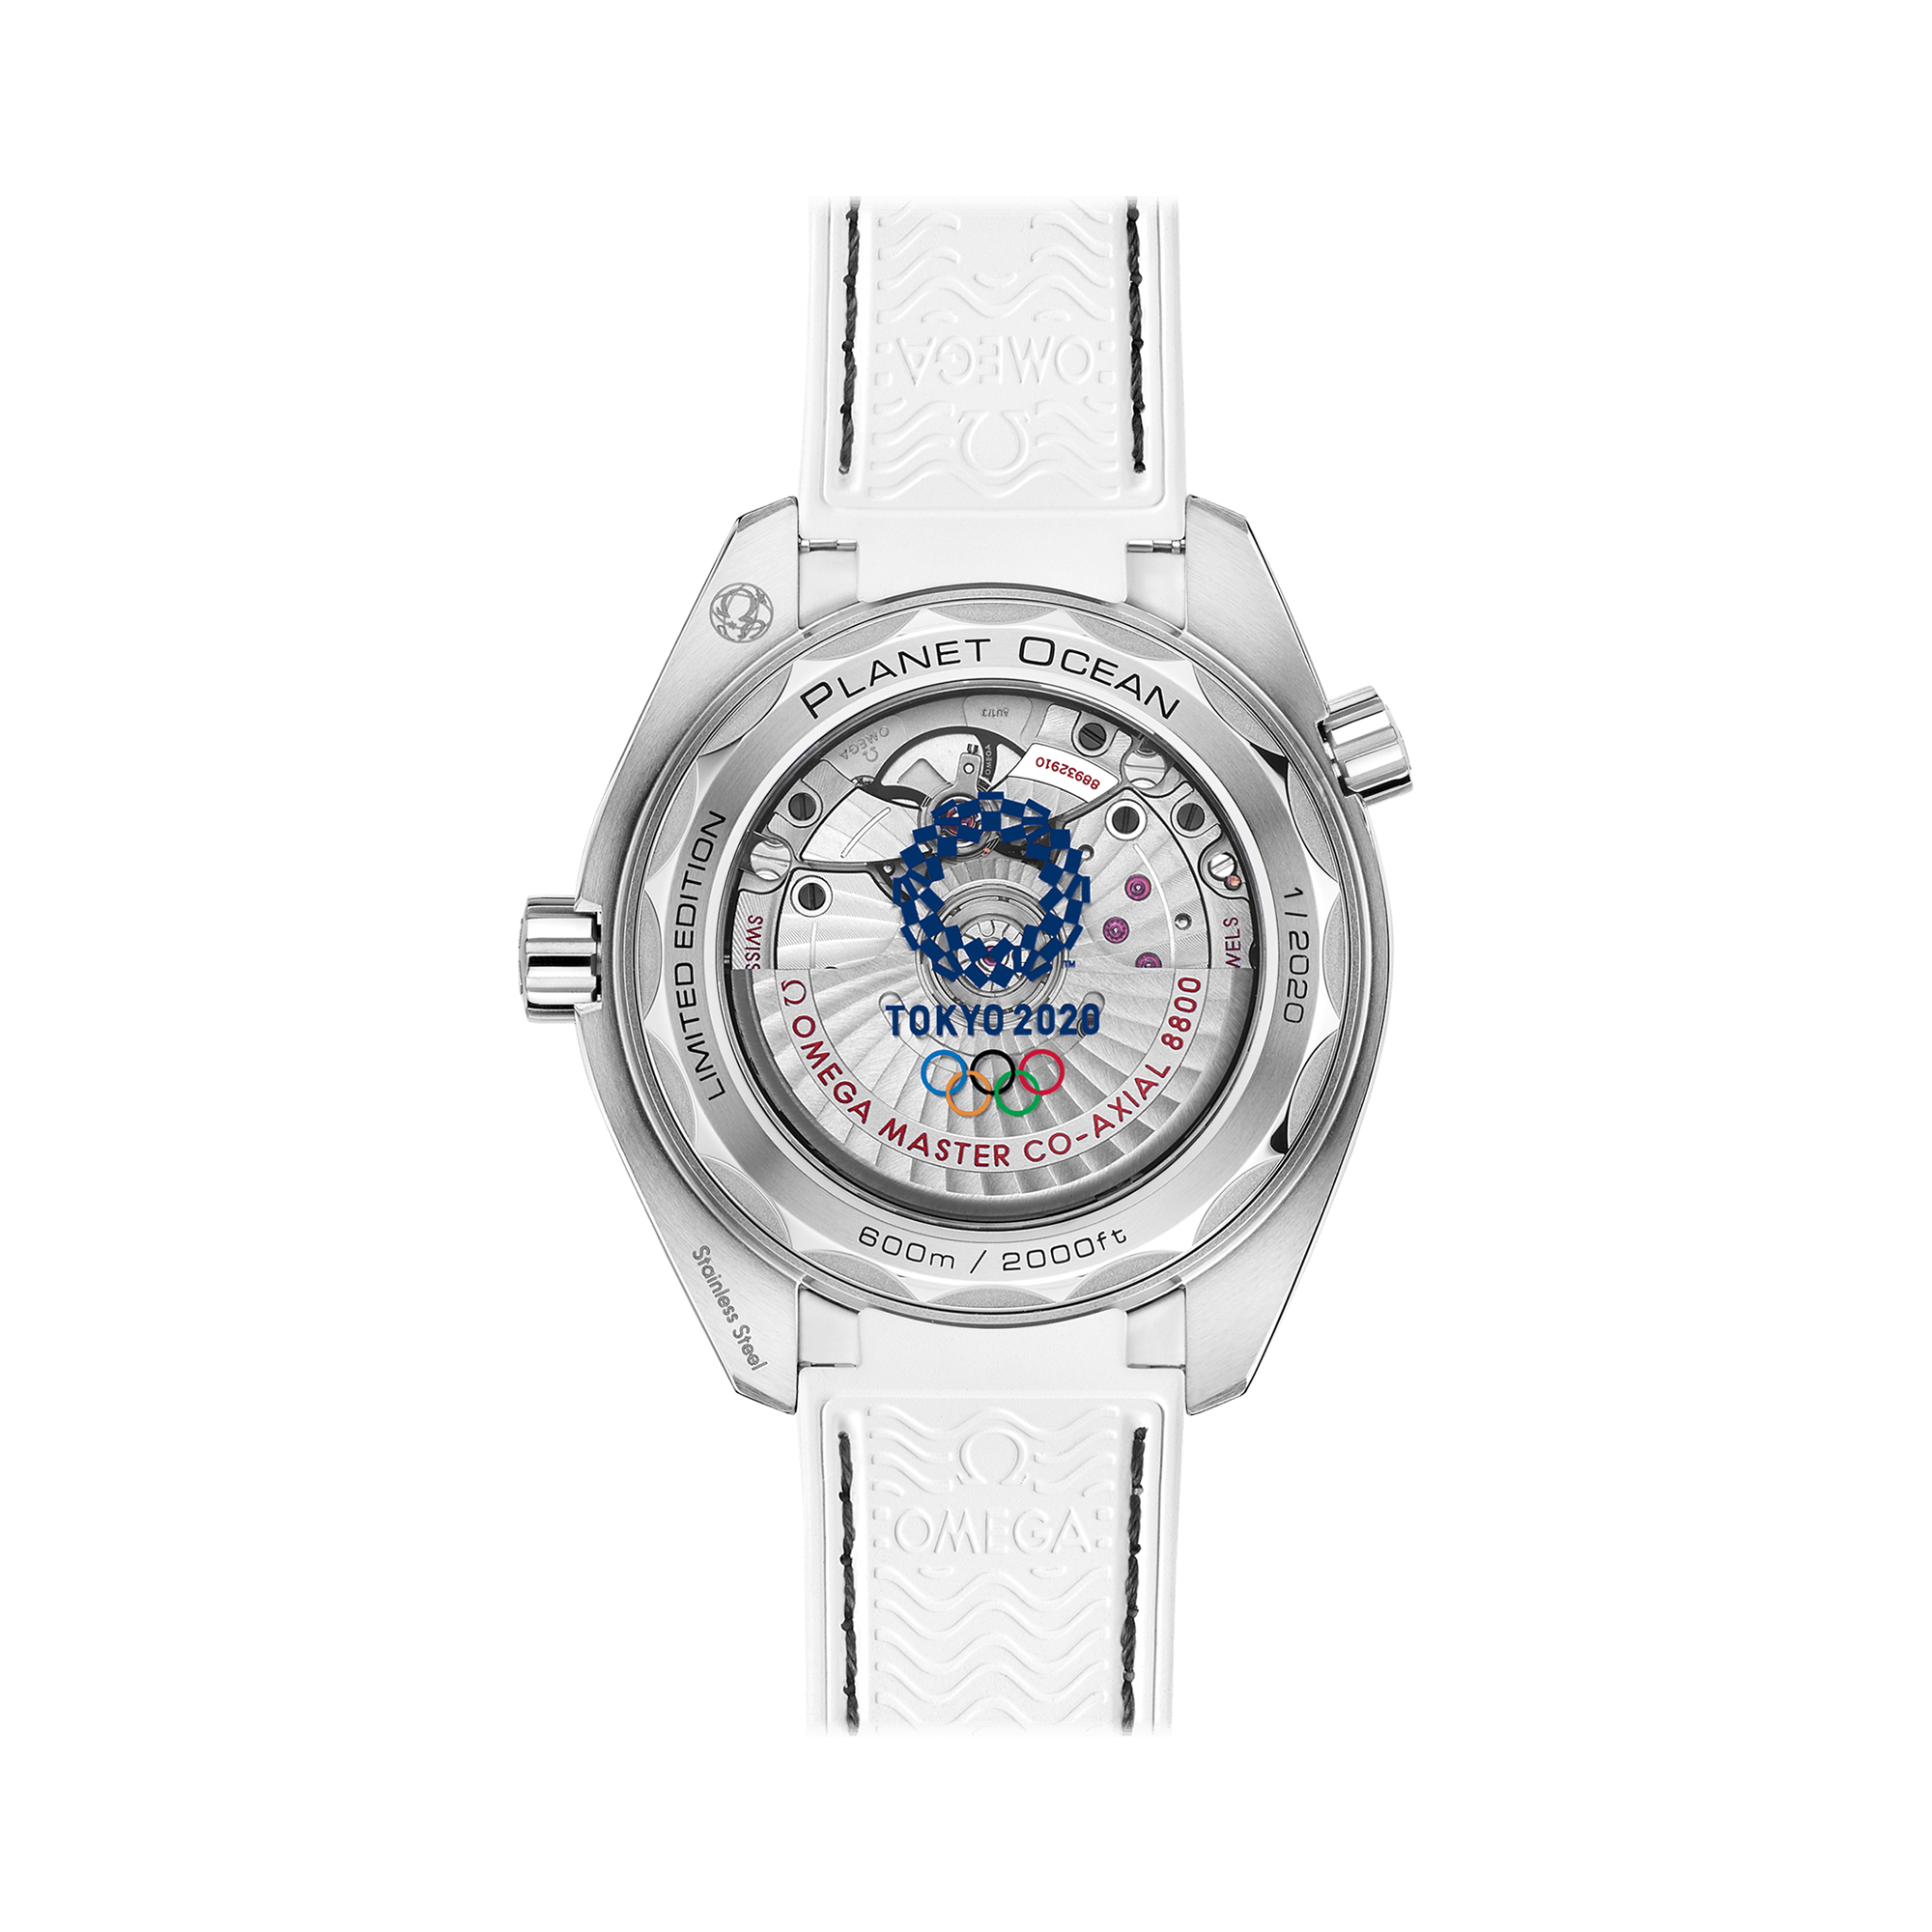 OMEGA Seamaster Olympic Games Collection "Tokyo 2020" Limited Edition 39.5mm, White Dial, Arabic/Baton Numerals_2